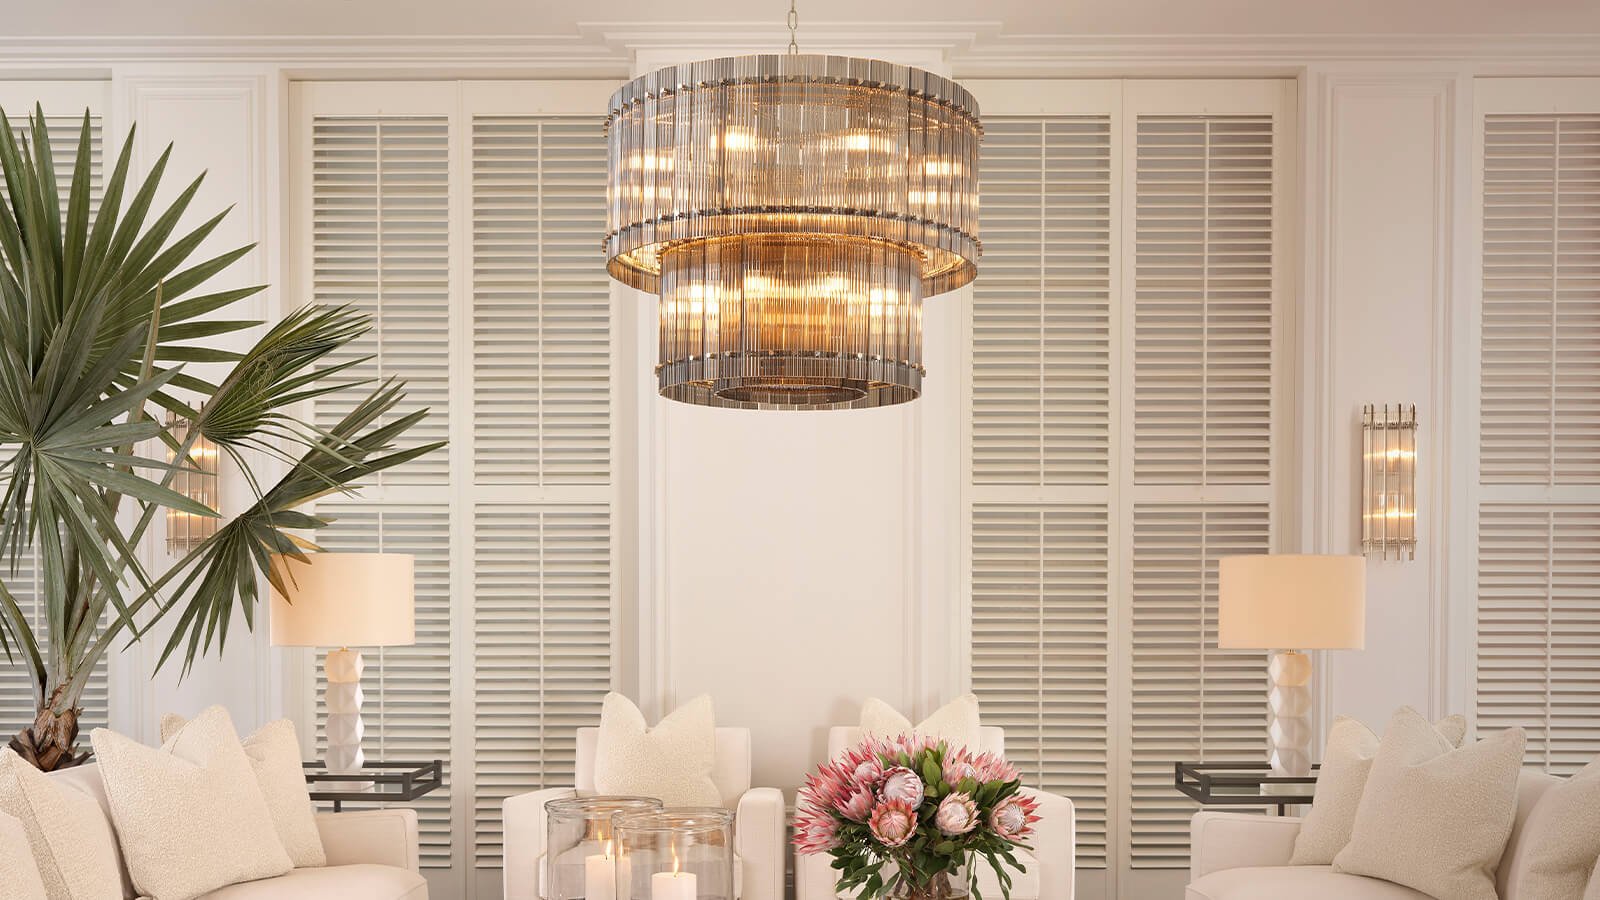 Ceiling Lights &amp; Chandeliers from Eichholtz - Newport